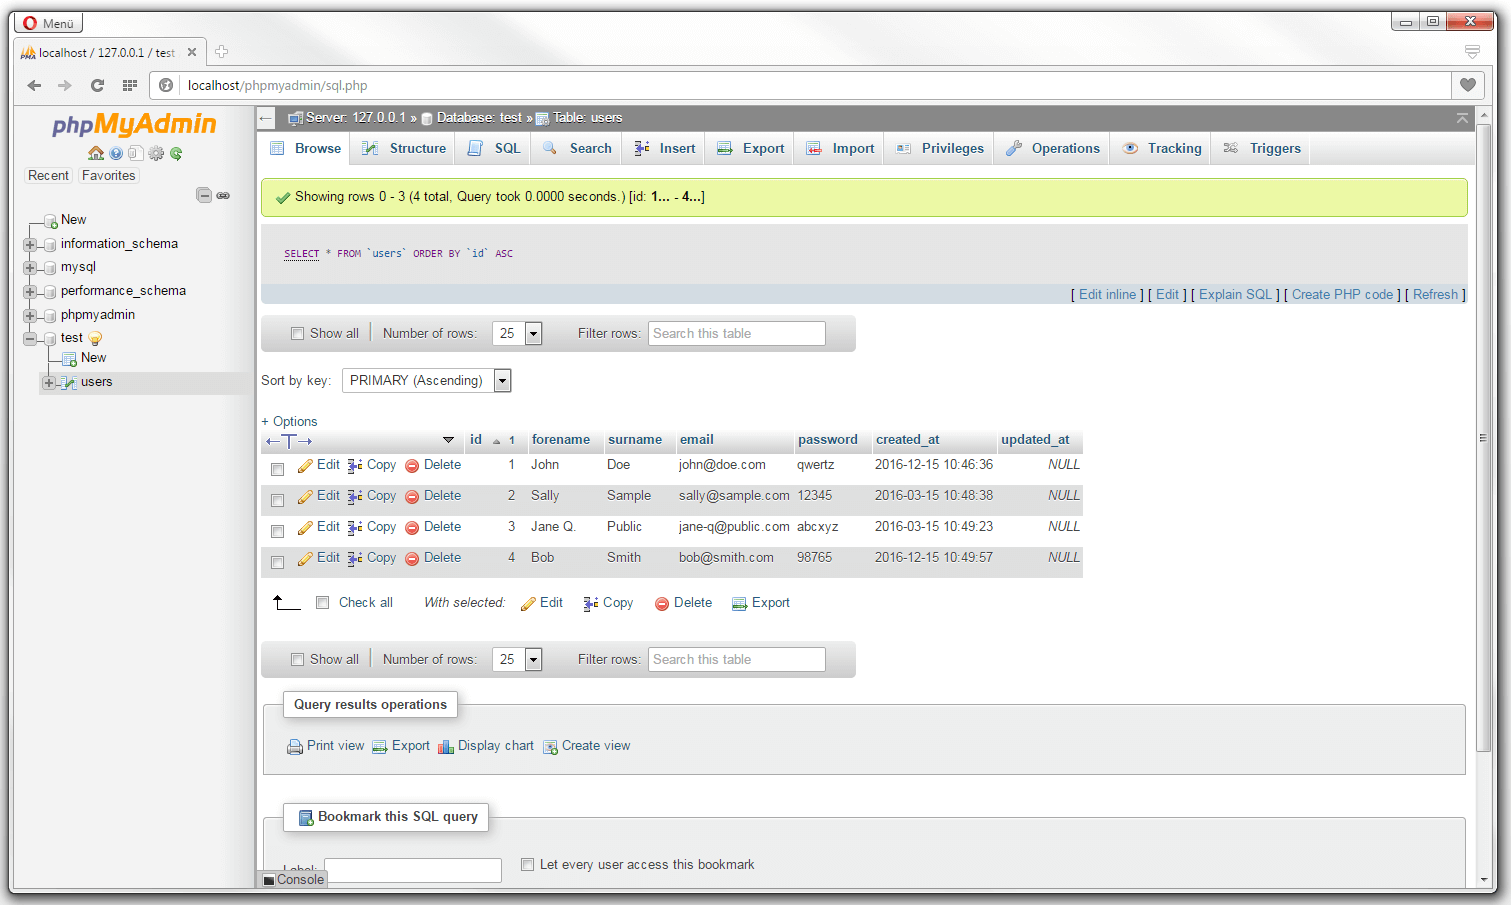 phpMyAdmin: Table overview in the ‘Browse’ tab